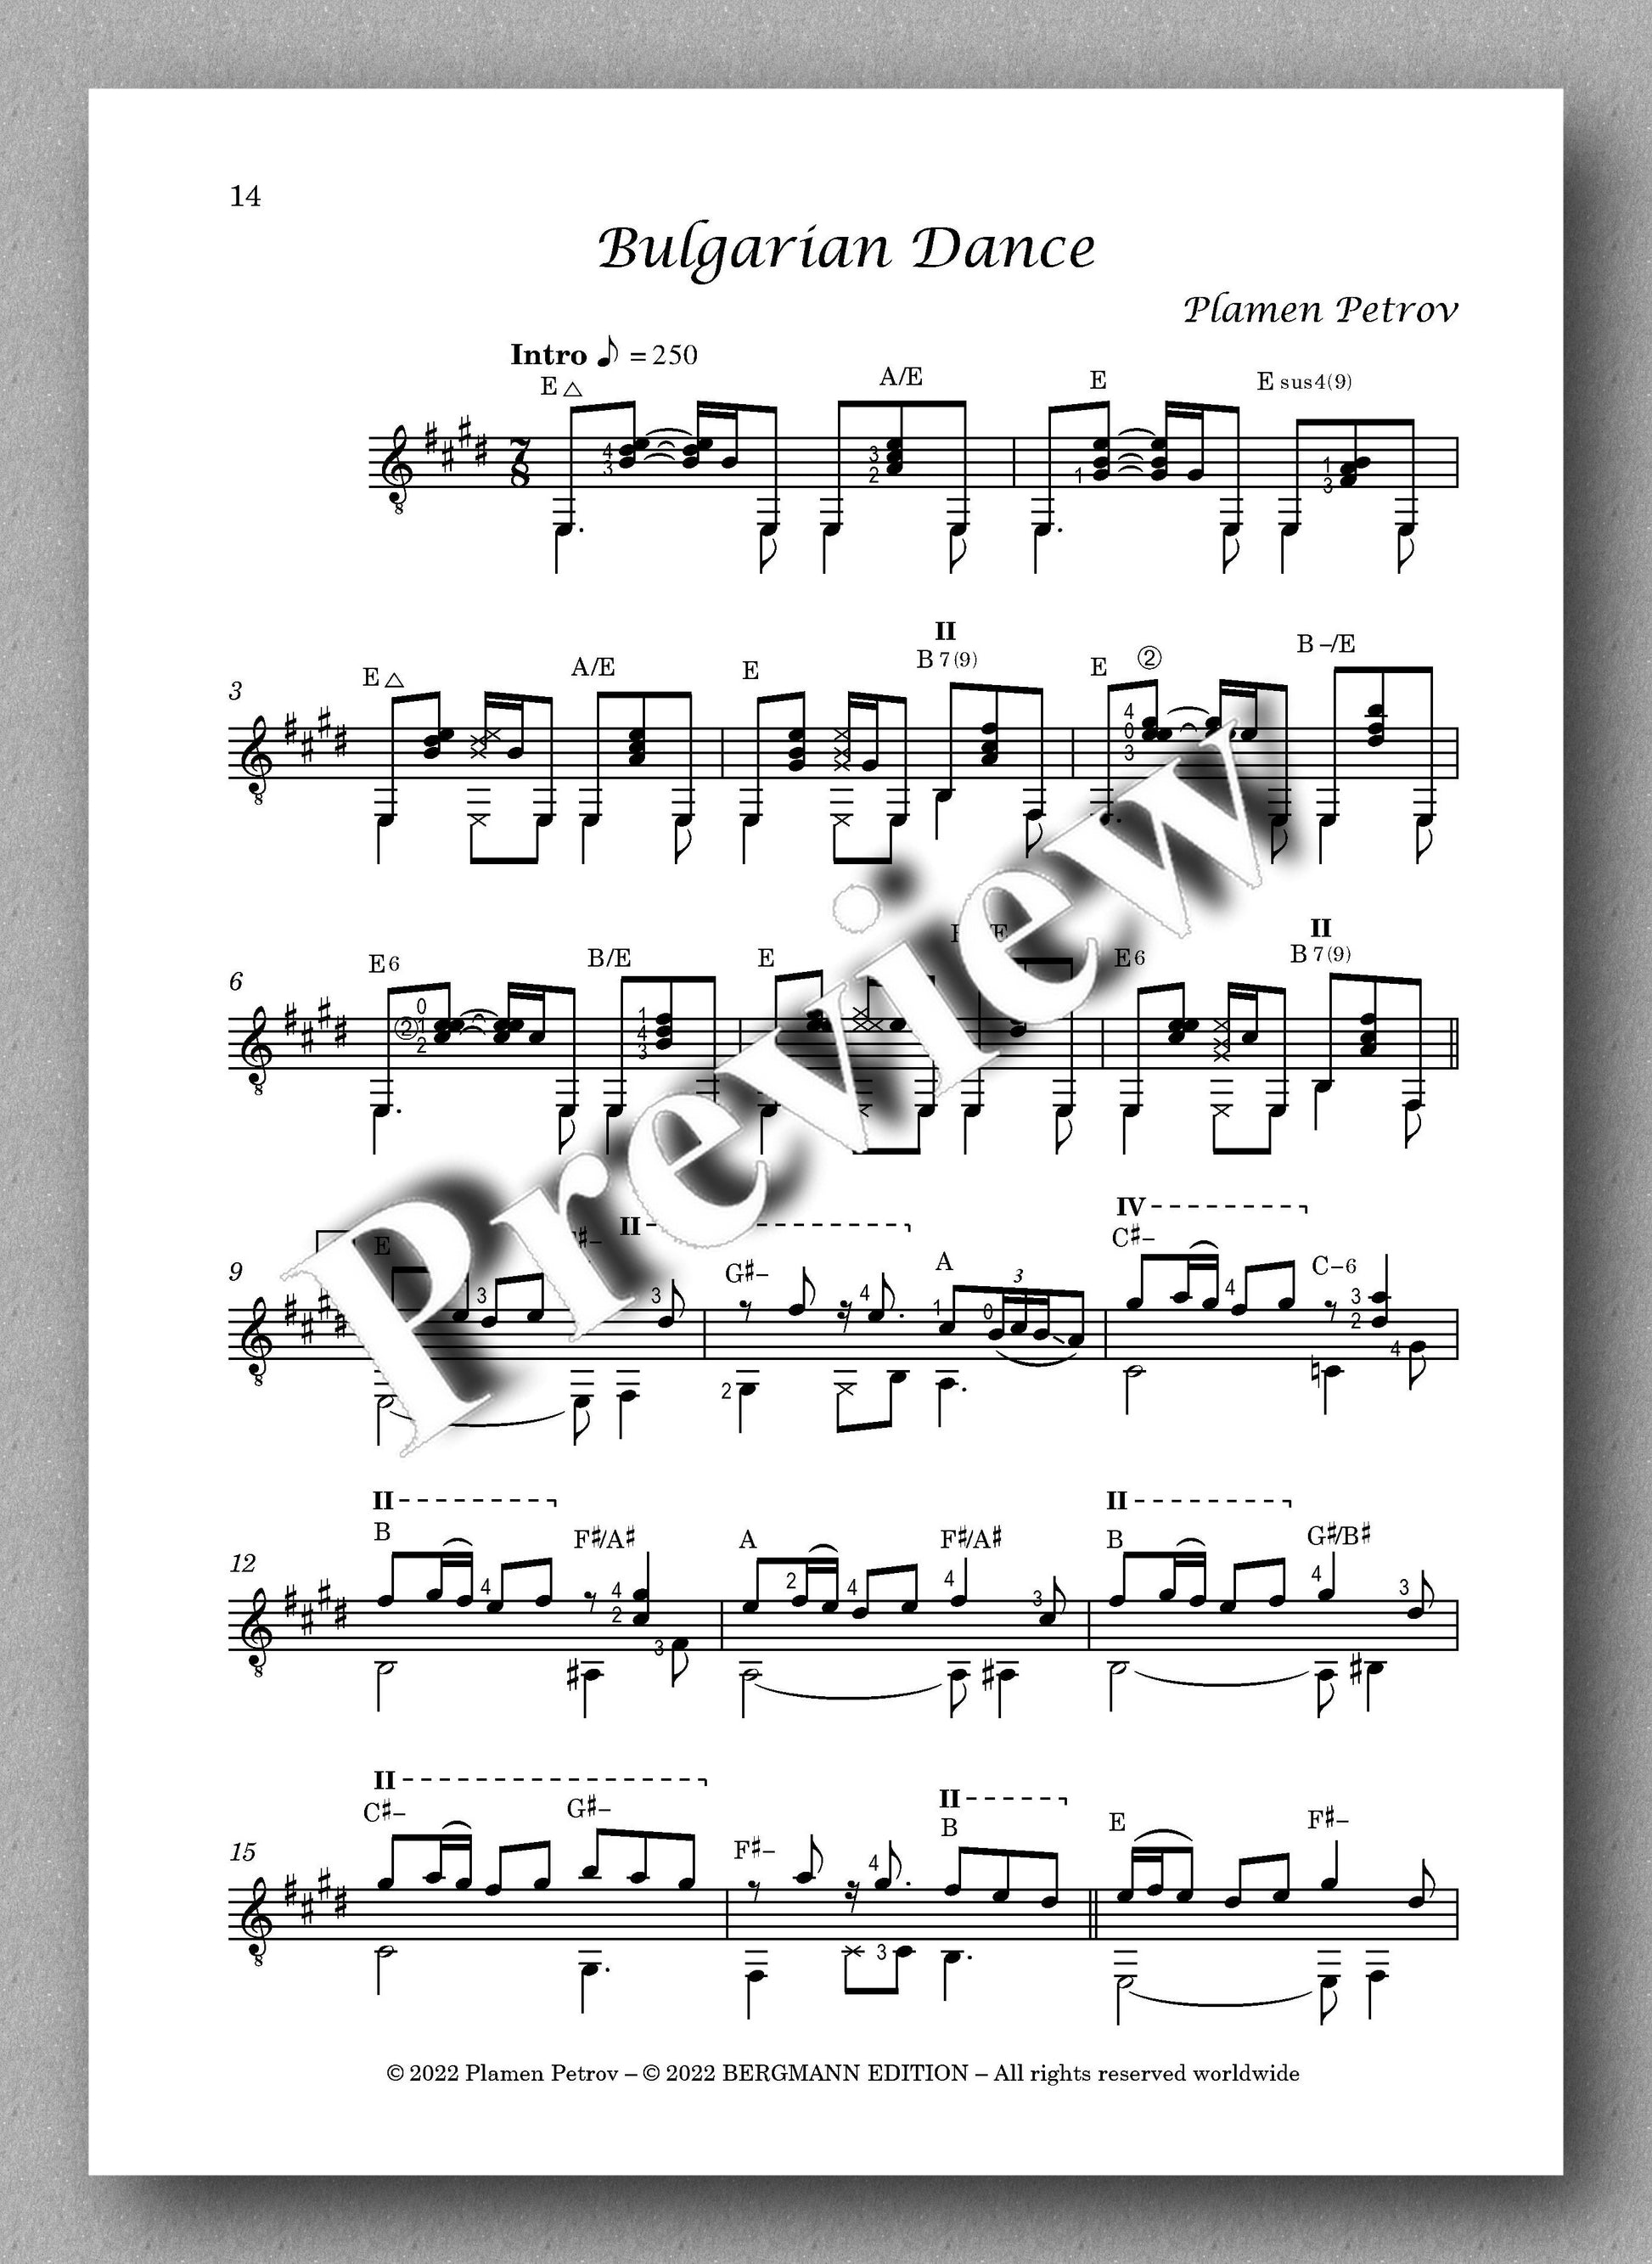 In Bulgarian Mood by Plamen Petrov - preview of the  music score 3